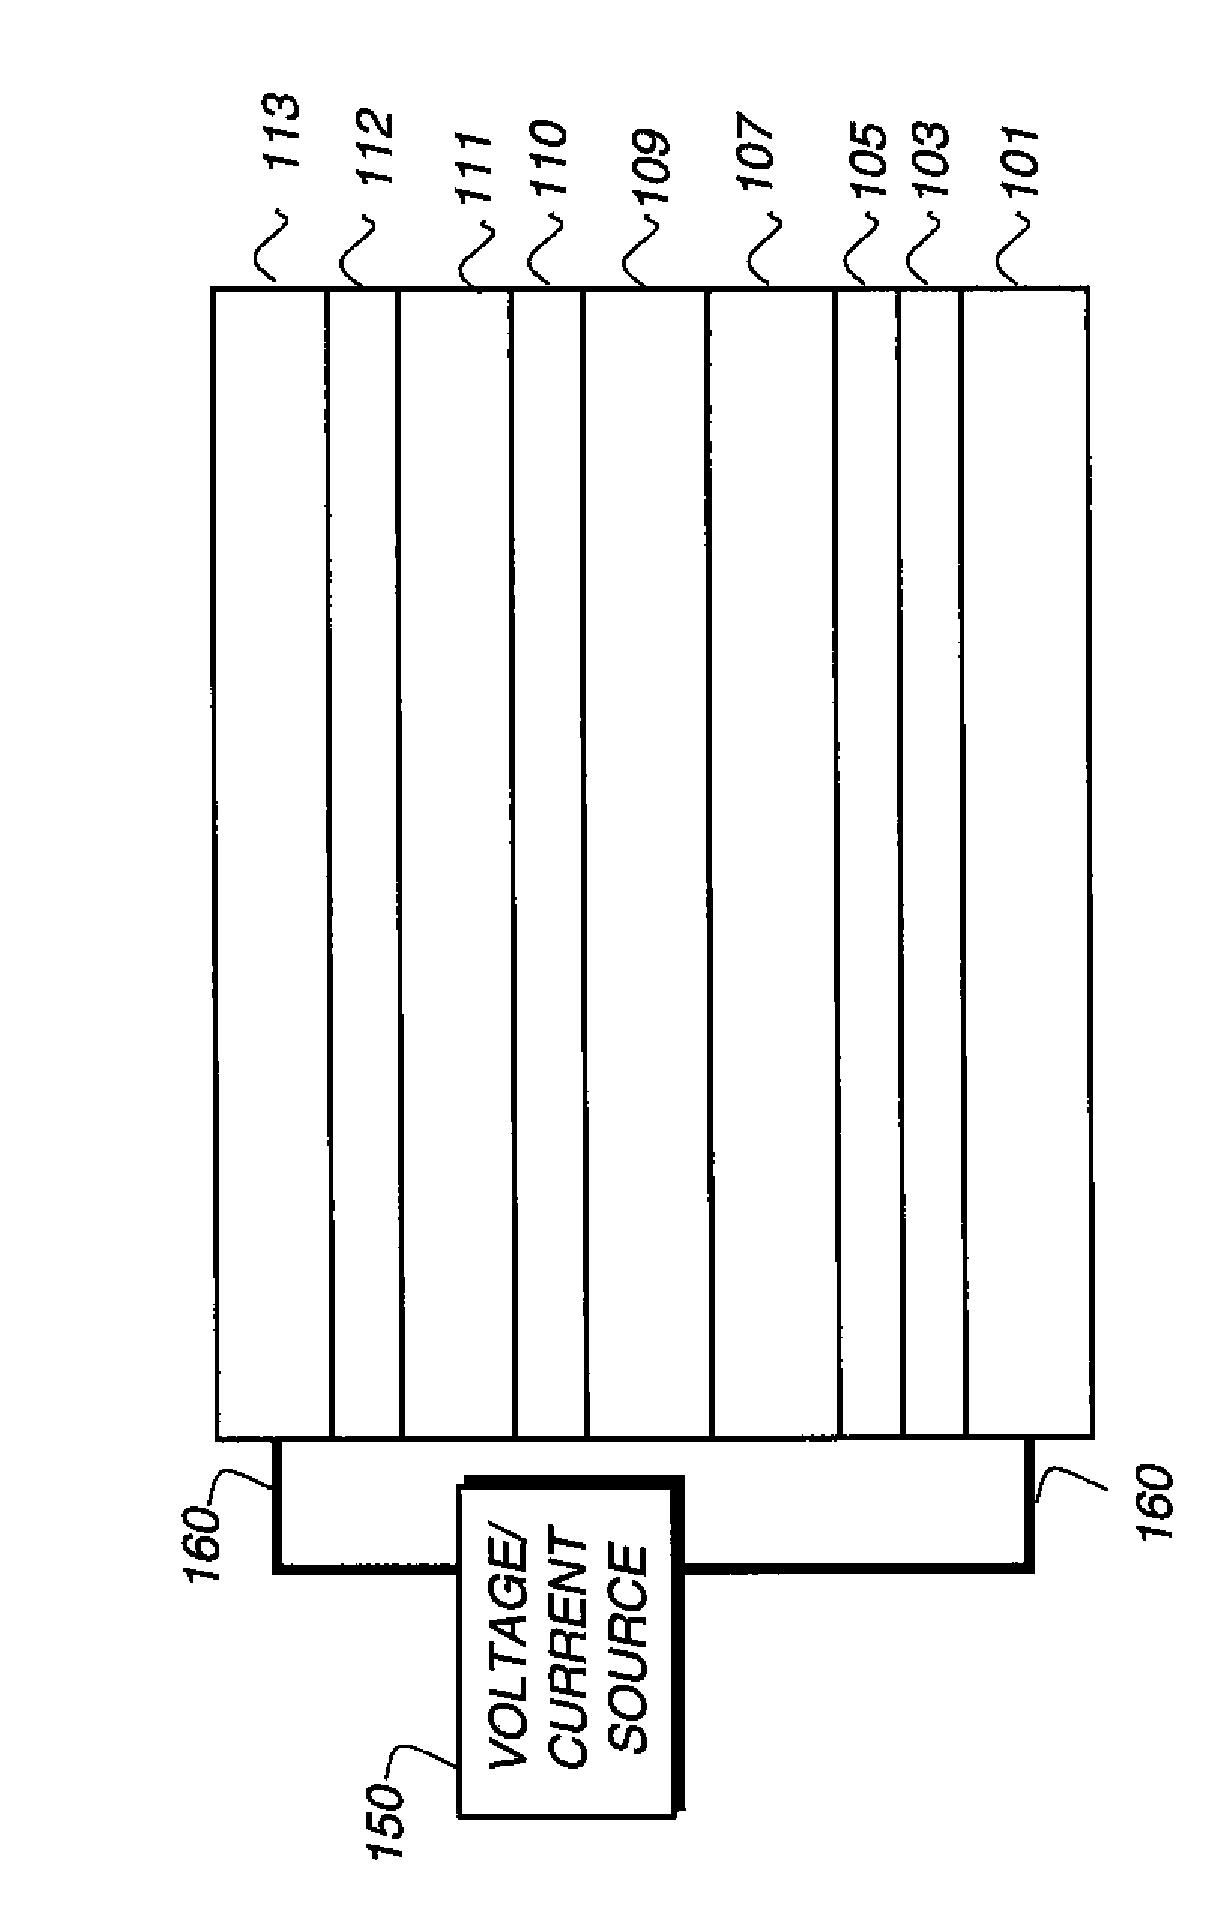 Electroluminescent device including an anthracene derivative